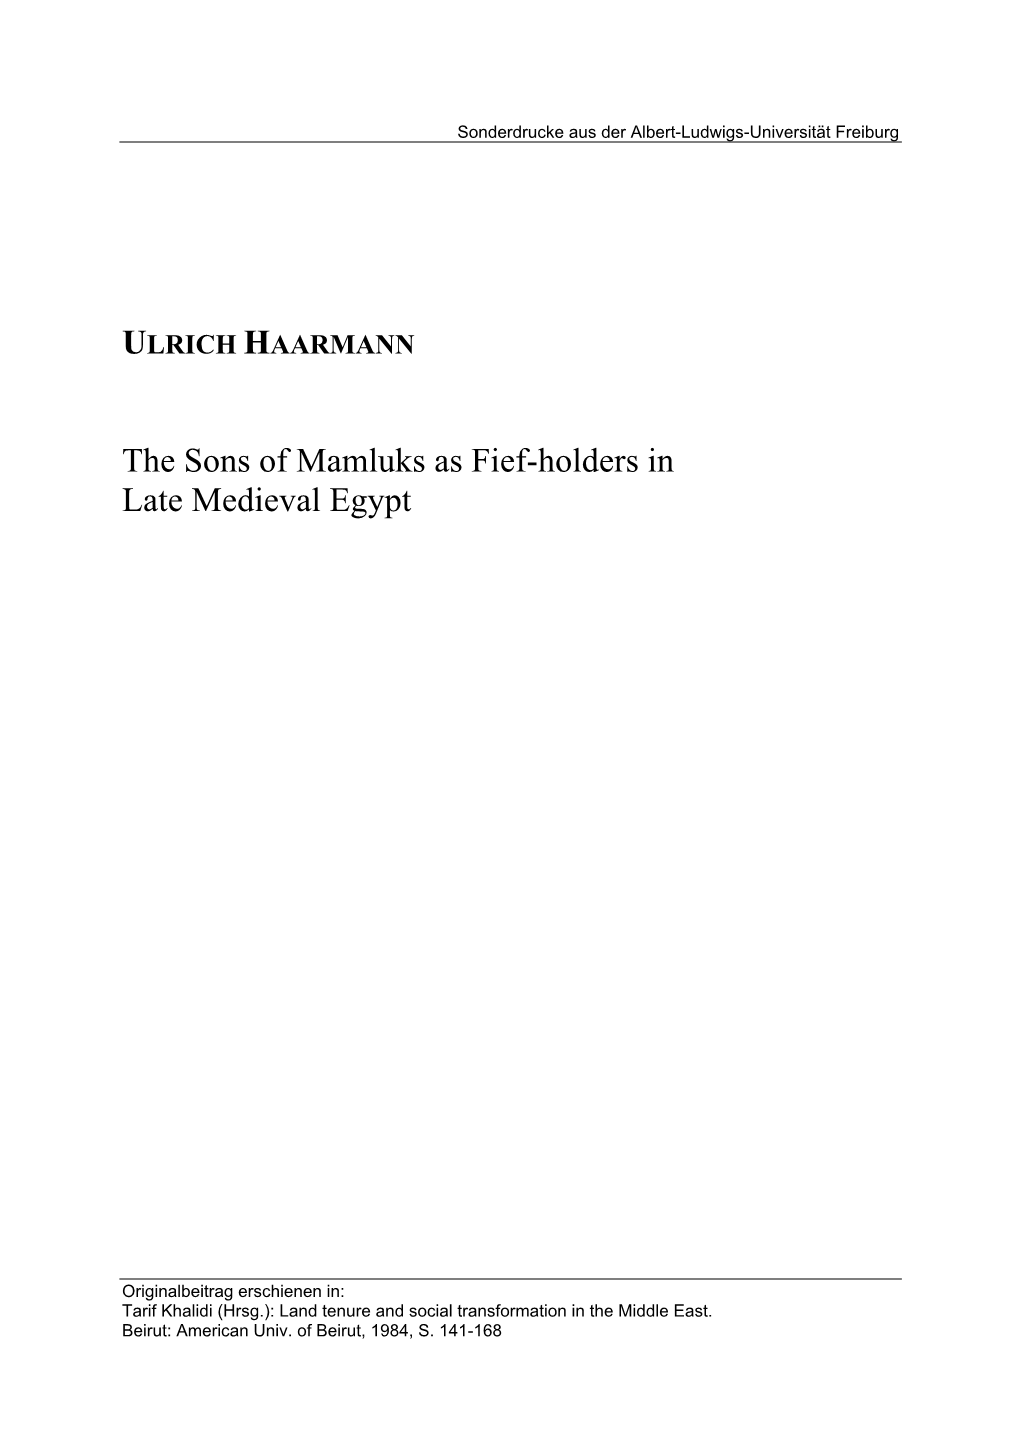 The Sons of Mamluks As Fief-Holders in Late Medieval Egypt